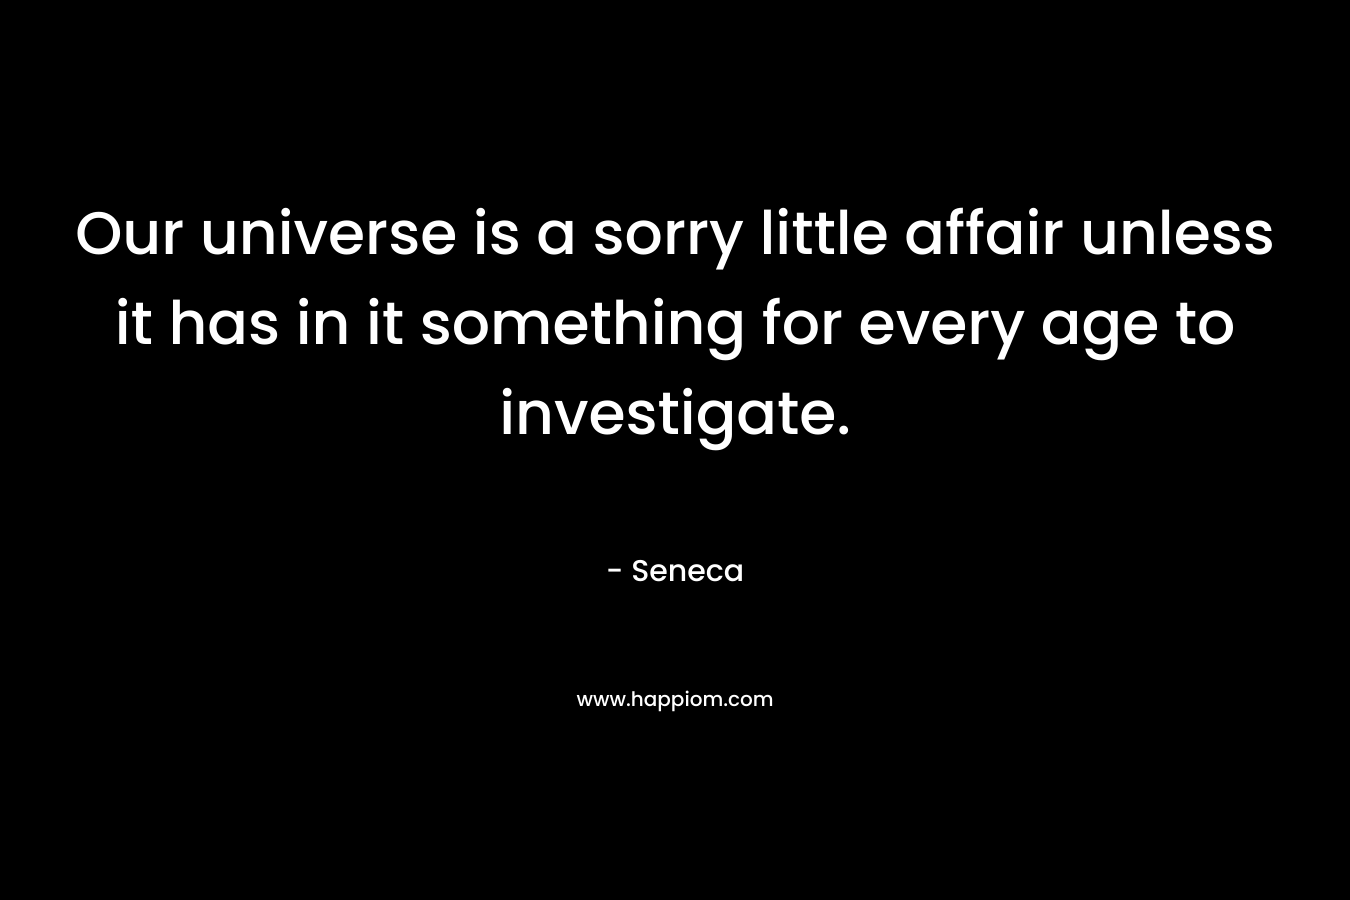 Our universe is a sorry little affair unless it has in it something for every age to investigate.